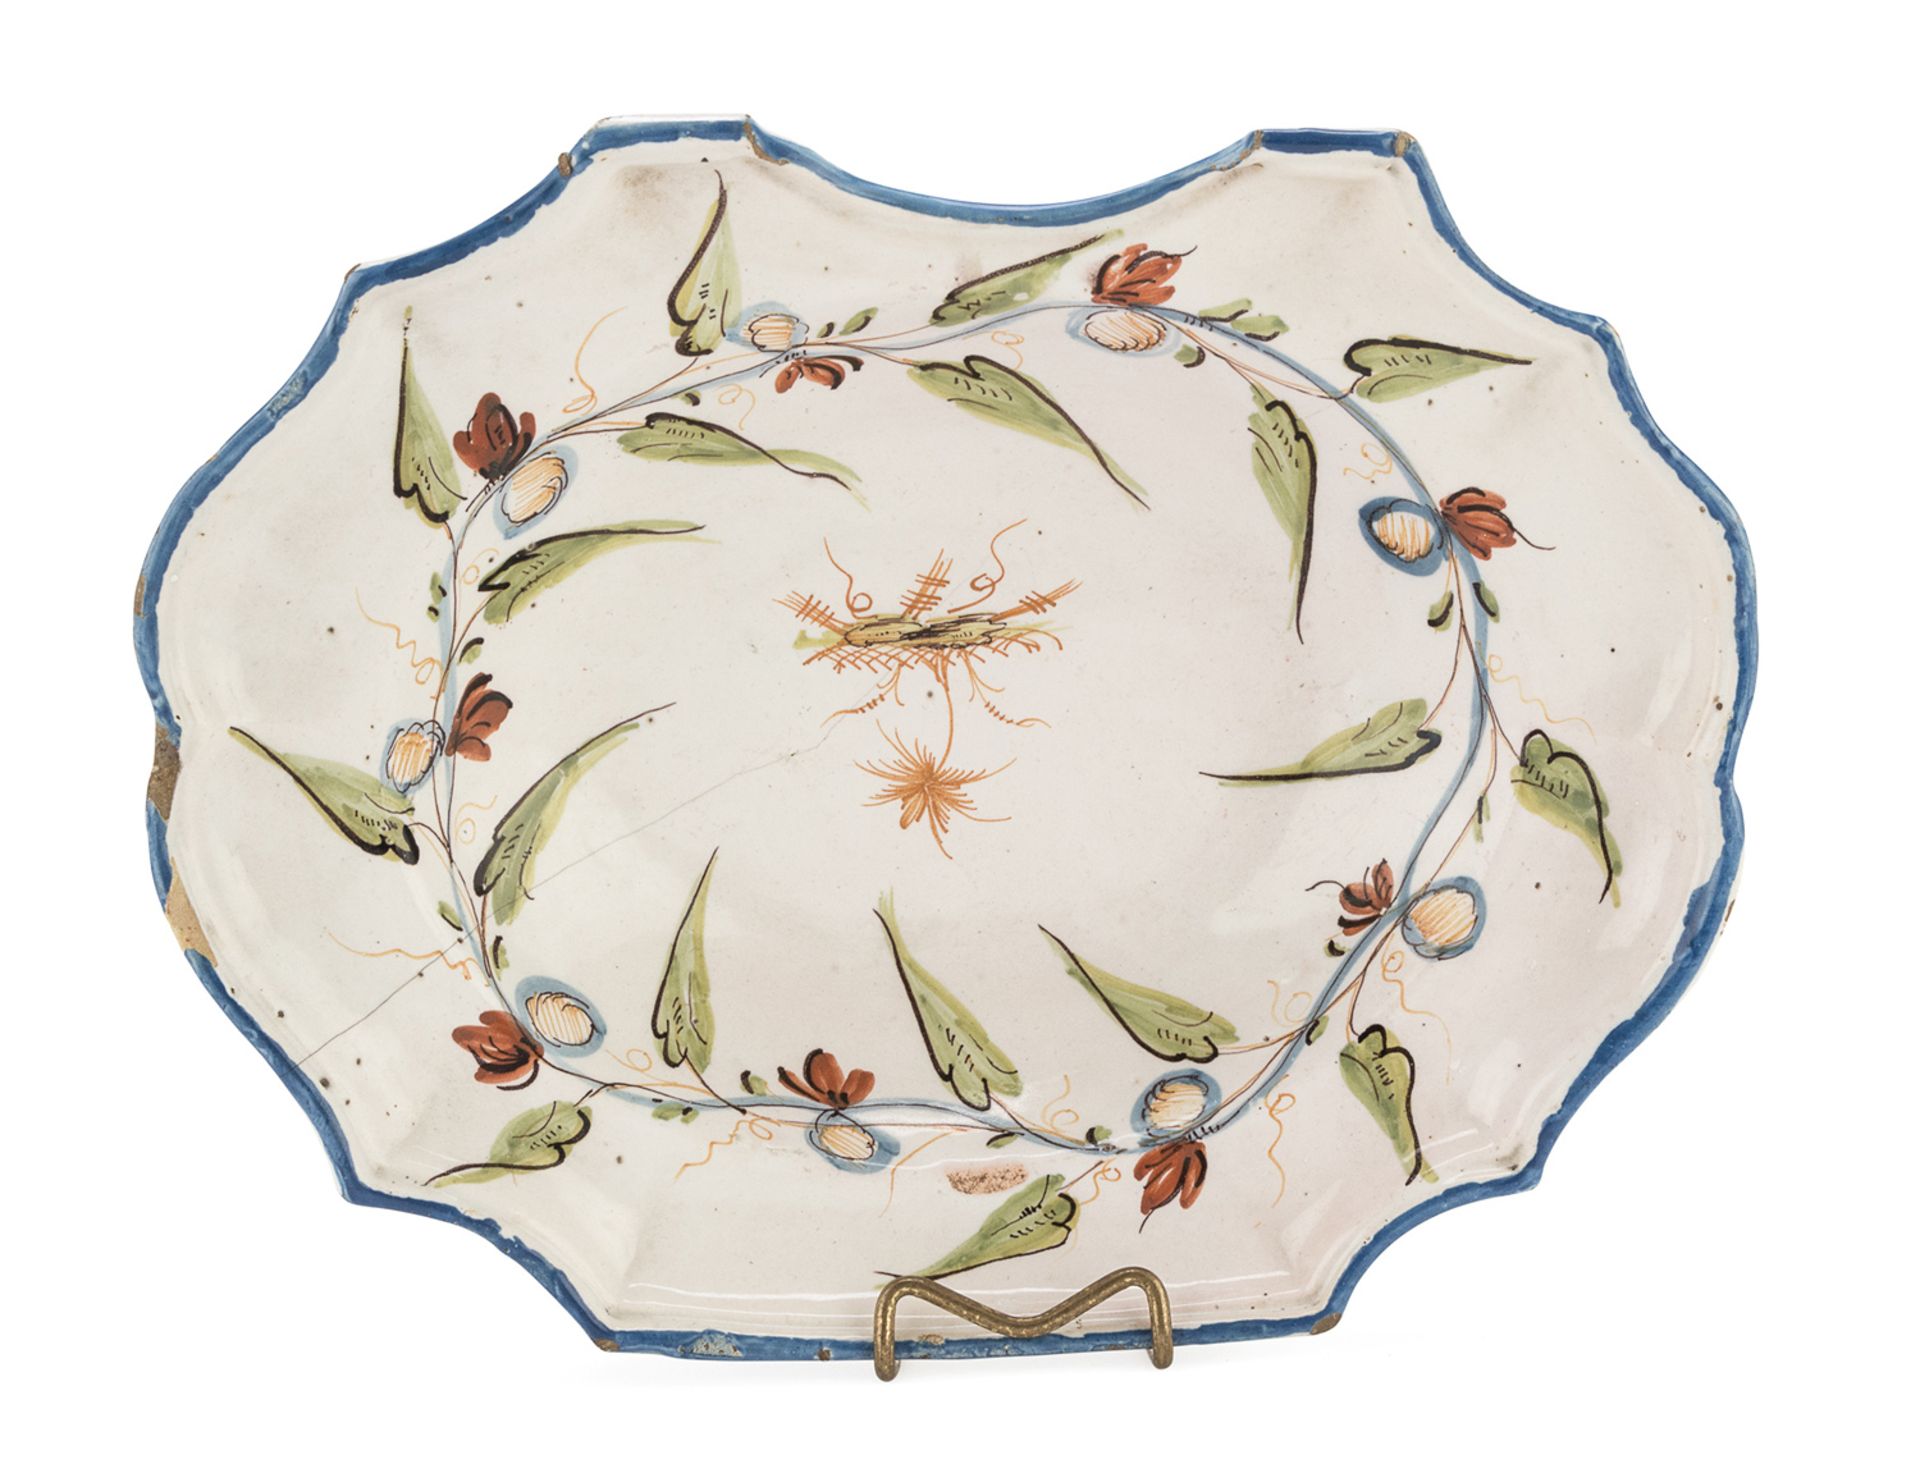 SHAVING PLATE IN MAJOLICA NORTHERN ITALY 18th CENTURY